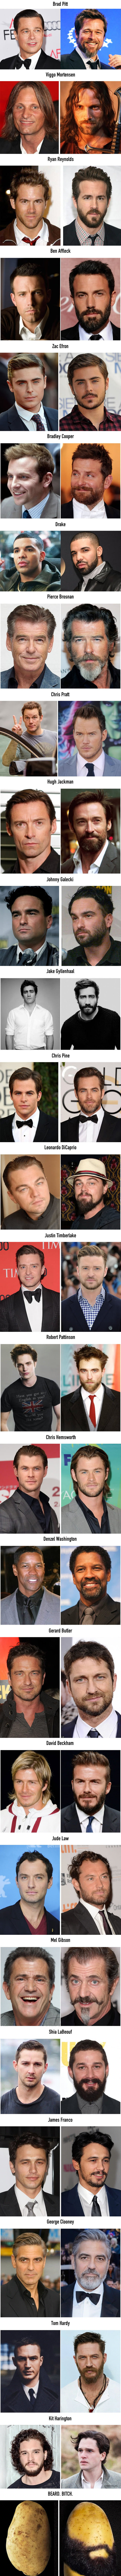 20+ Hollywood Actors Tell You That Beard Can Change Everything